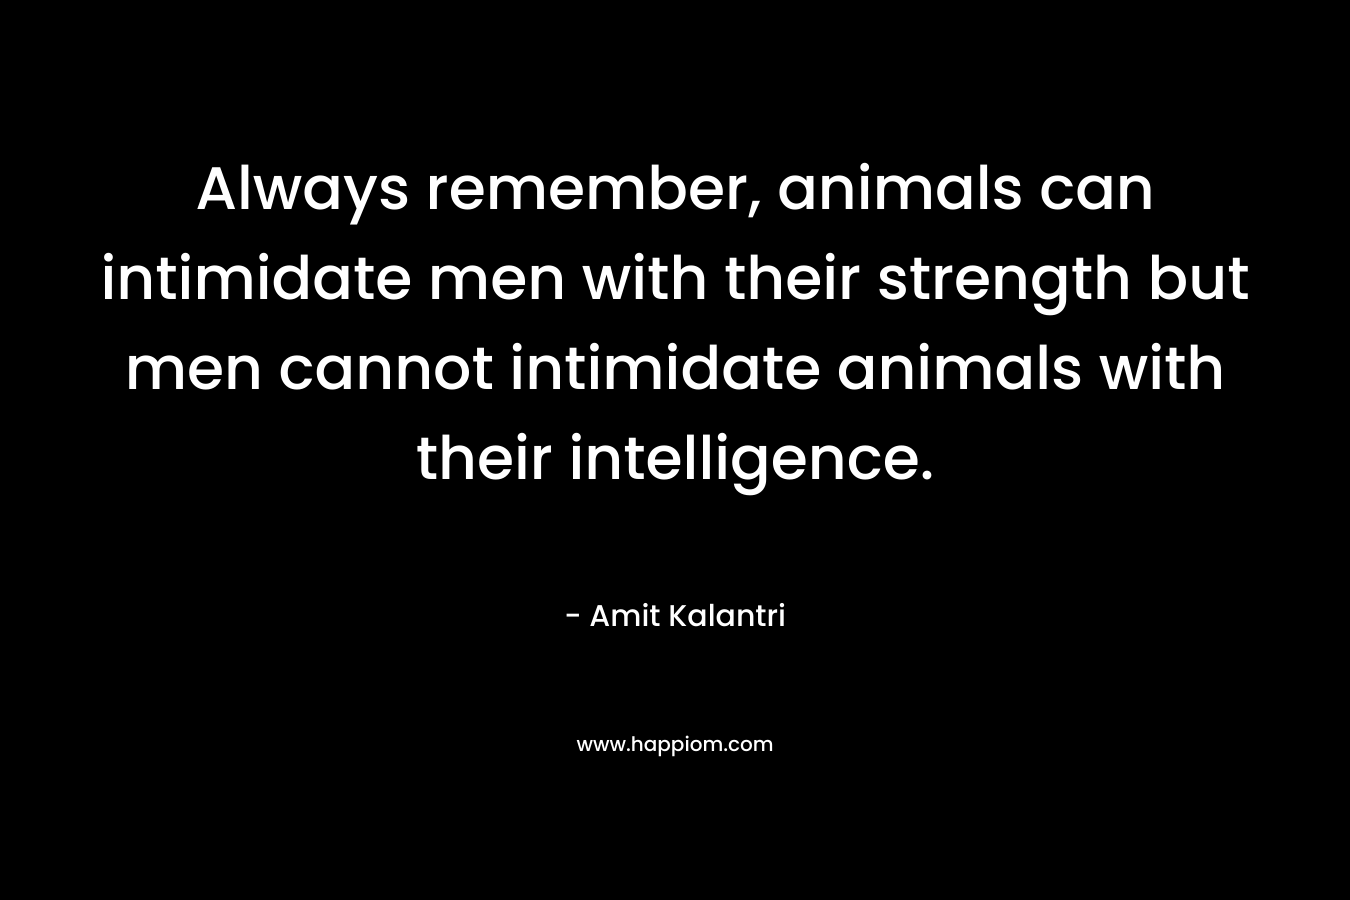 Always remember, animals can intimidate men with their strength but men cannot intimidate animals with their intelligence. – Amit Kalantri